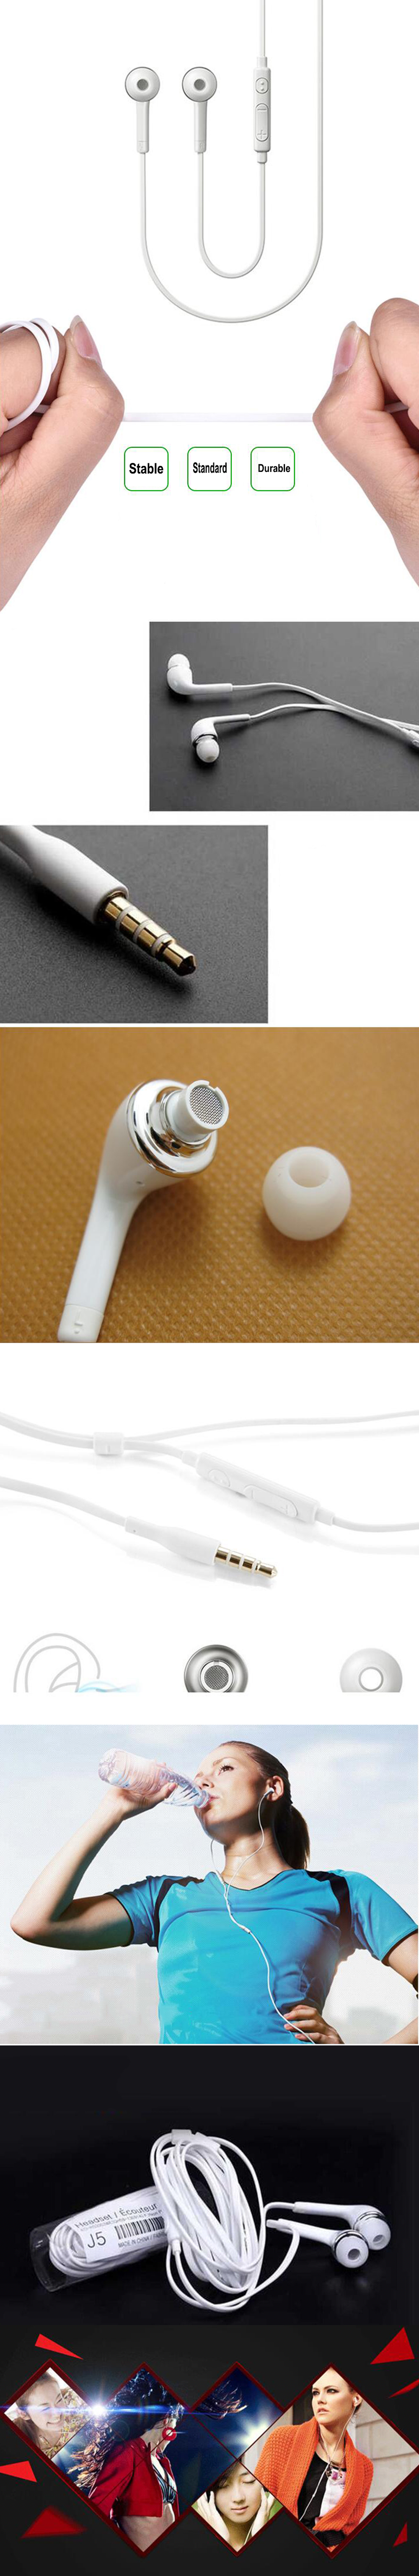 Minismile J5 3.5mm Jack In-Ear Style Earphone with Microphone for Phone - White